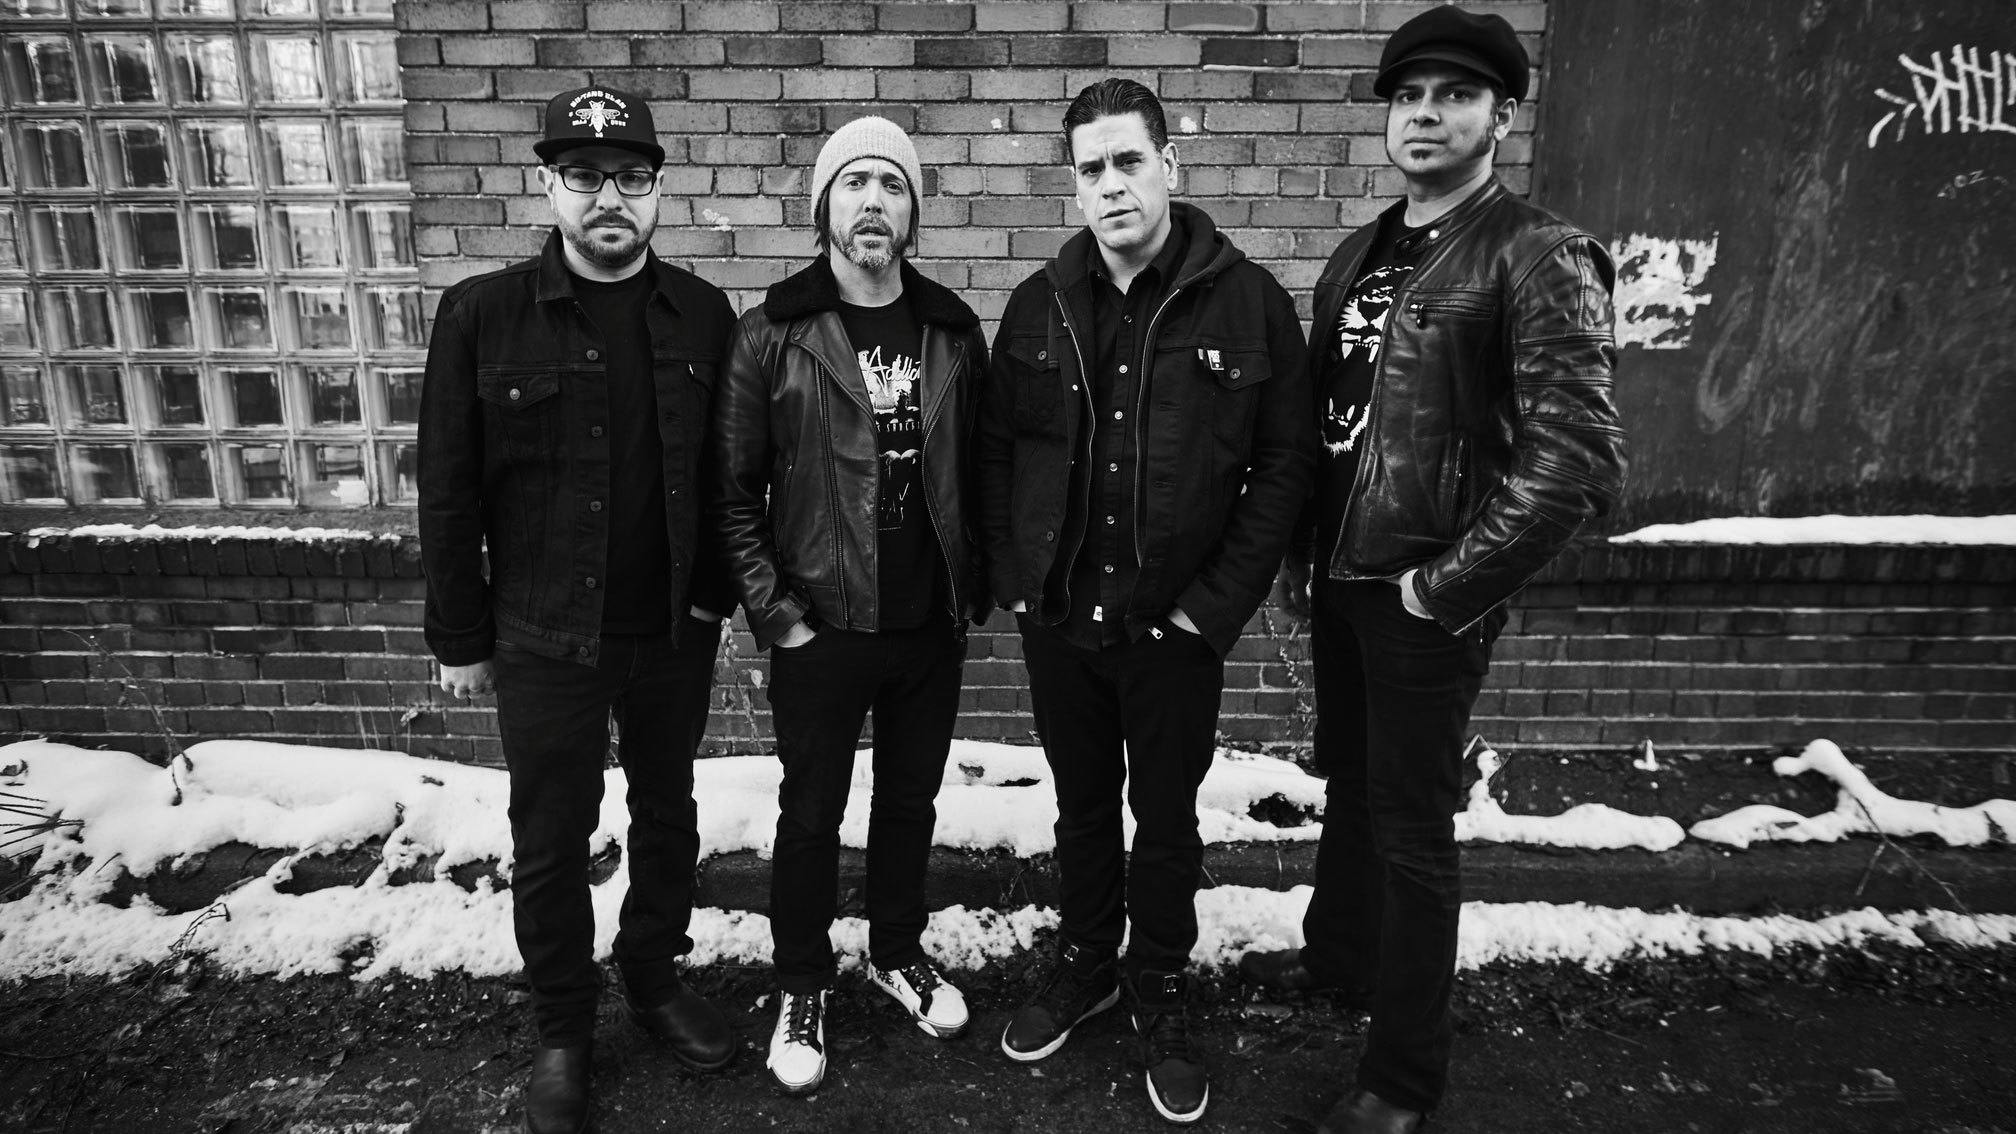 Billy Talent announce new album, release new single featuring Rivers Cuomo